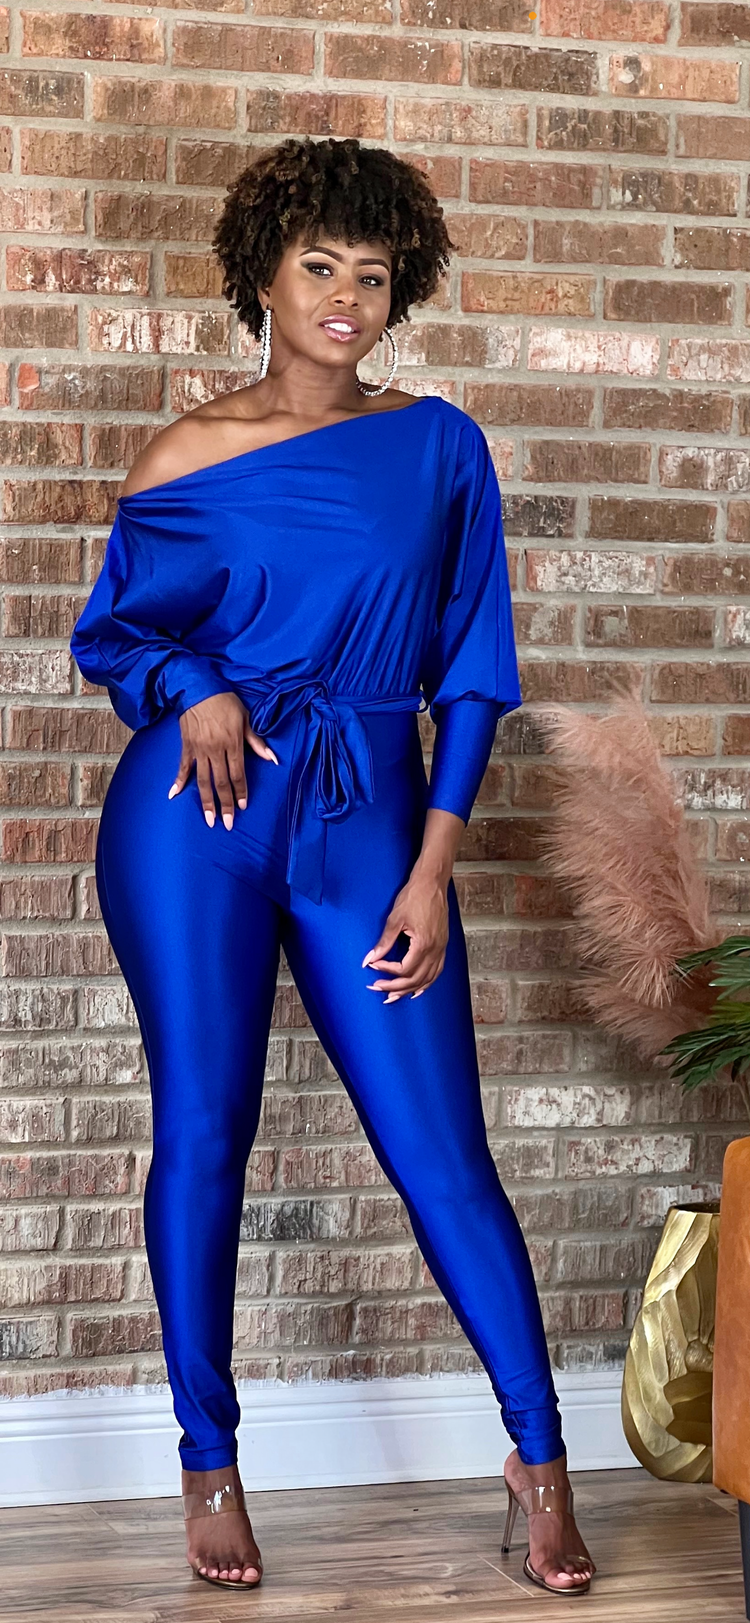 Get To It Jumper Royal Blue (7 colors)